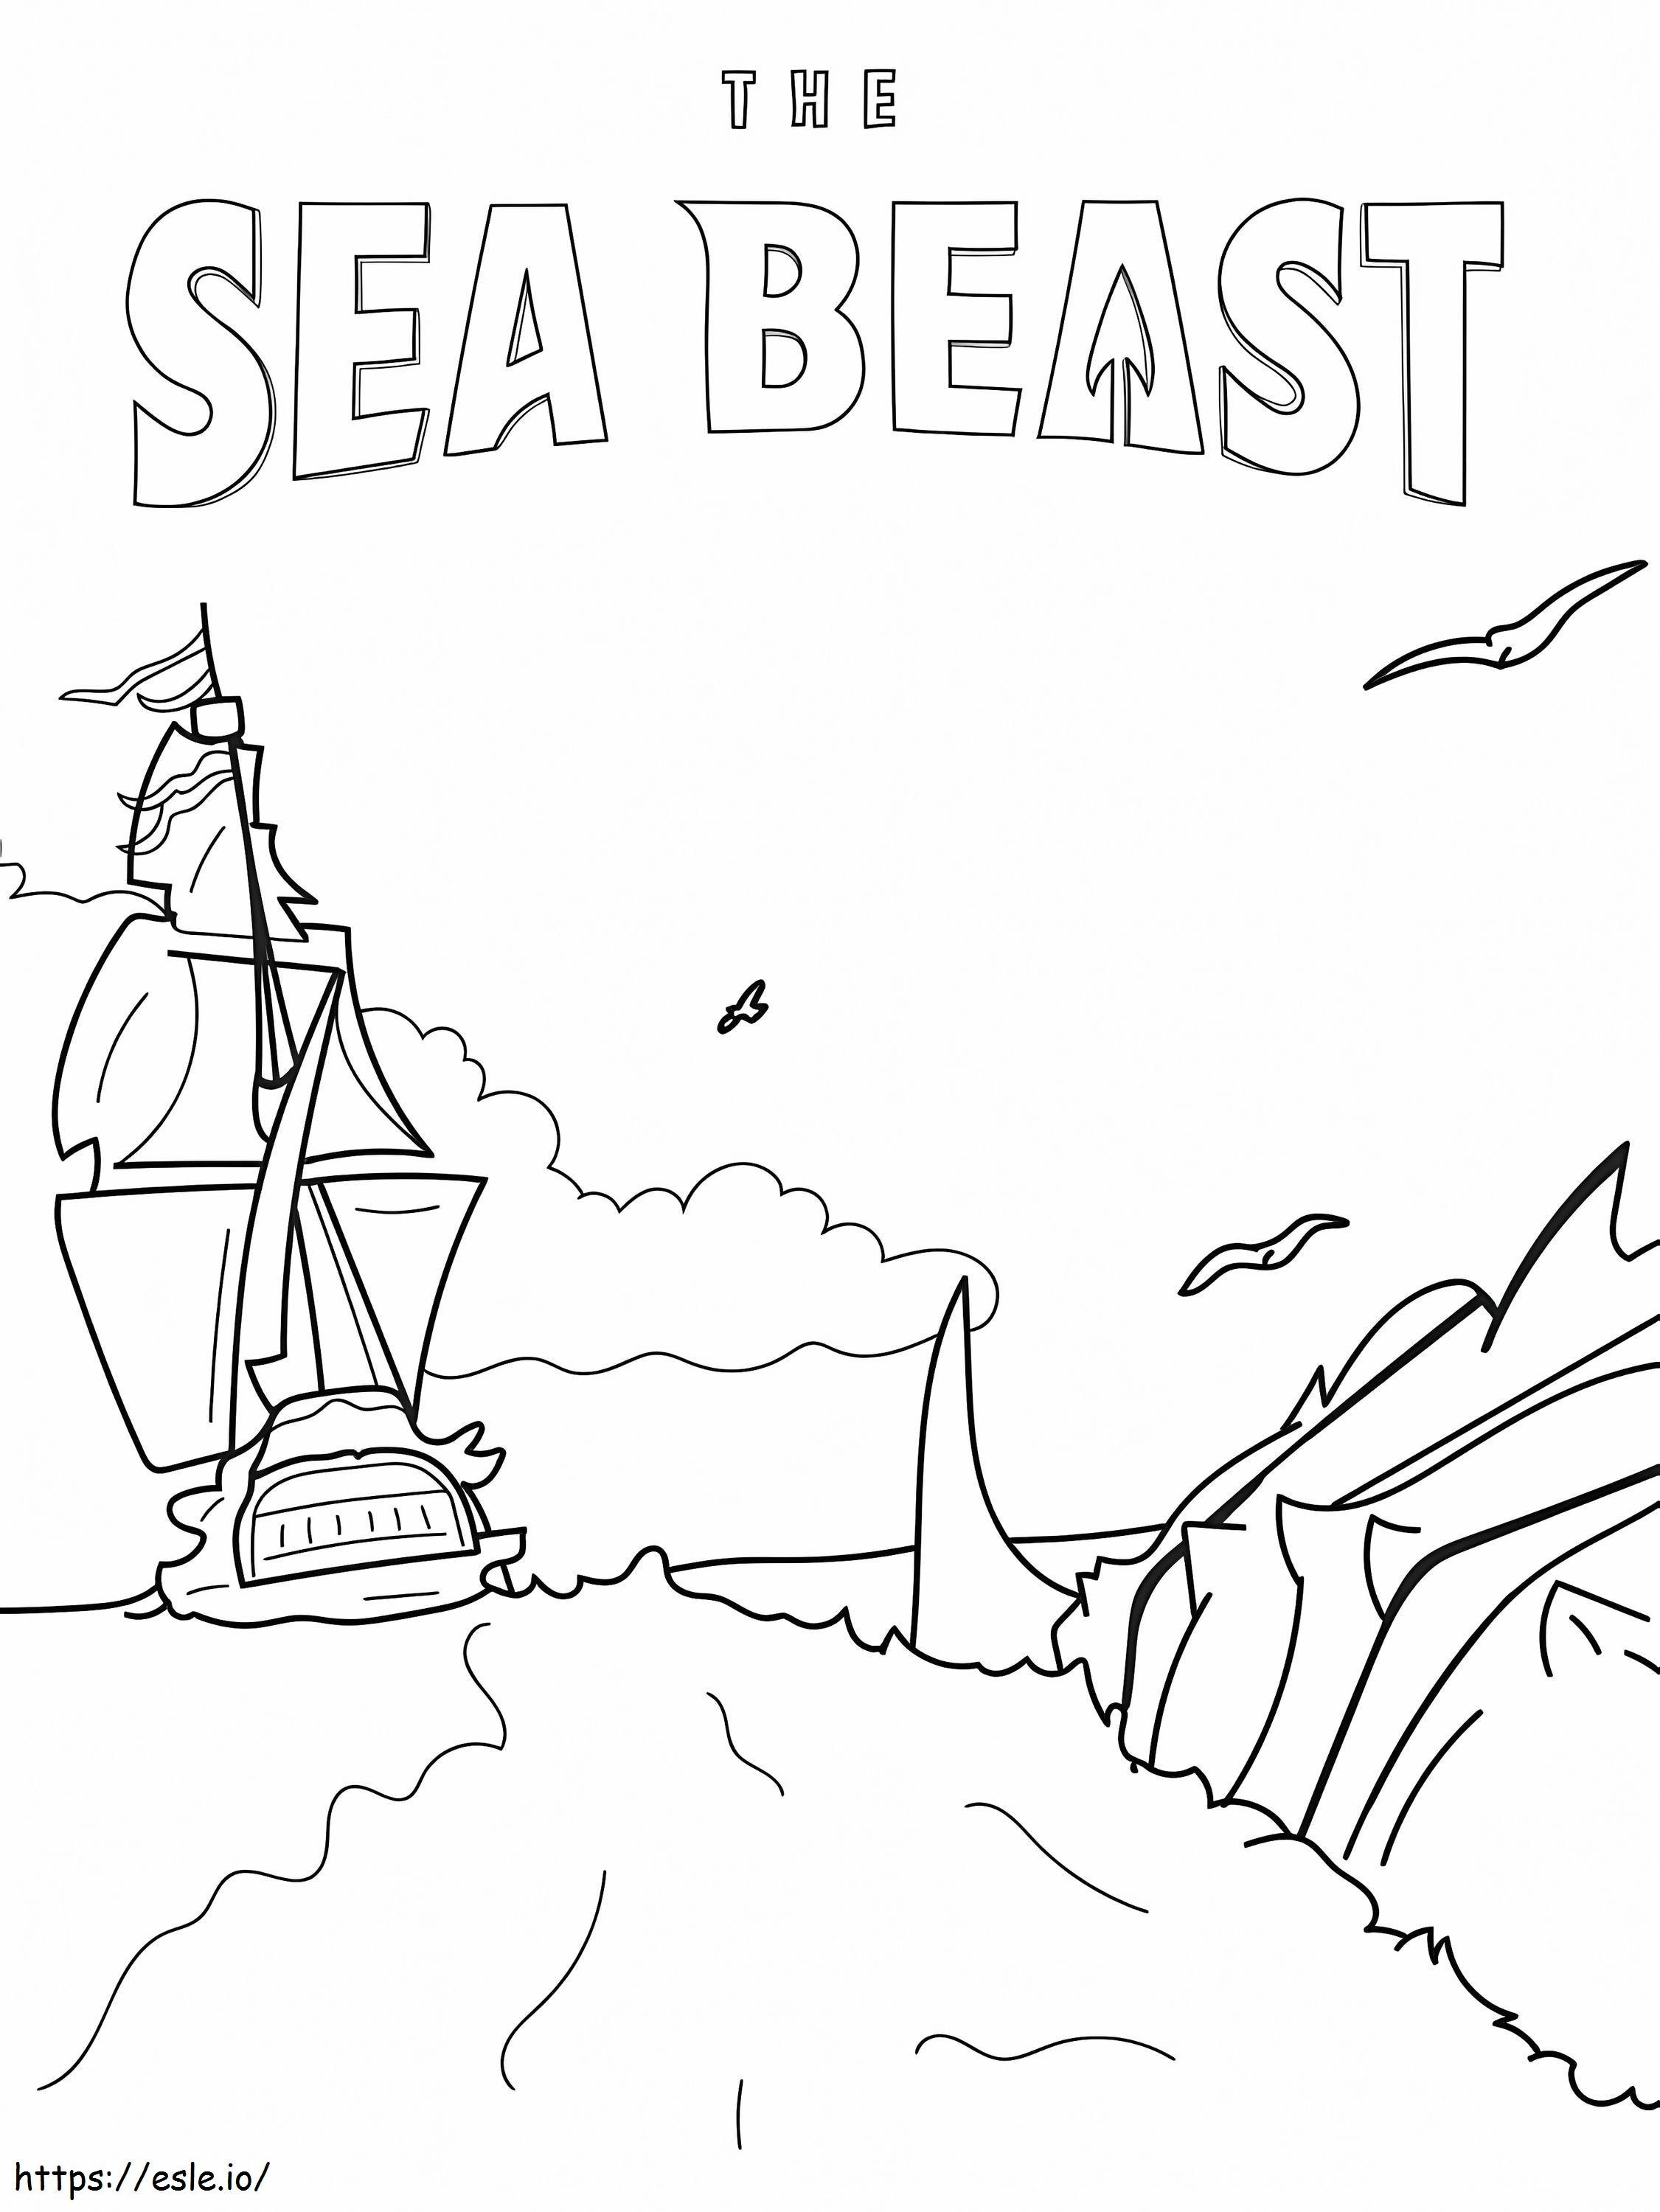 Print The Sea Beast coloring page